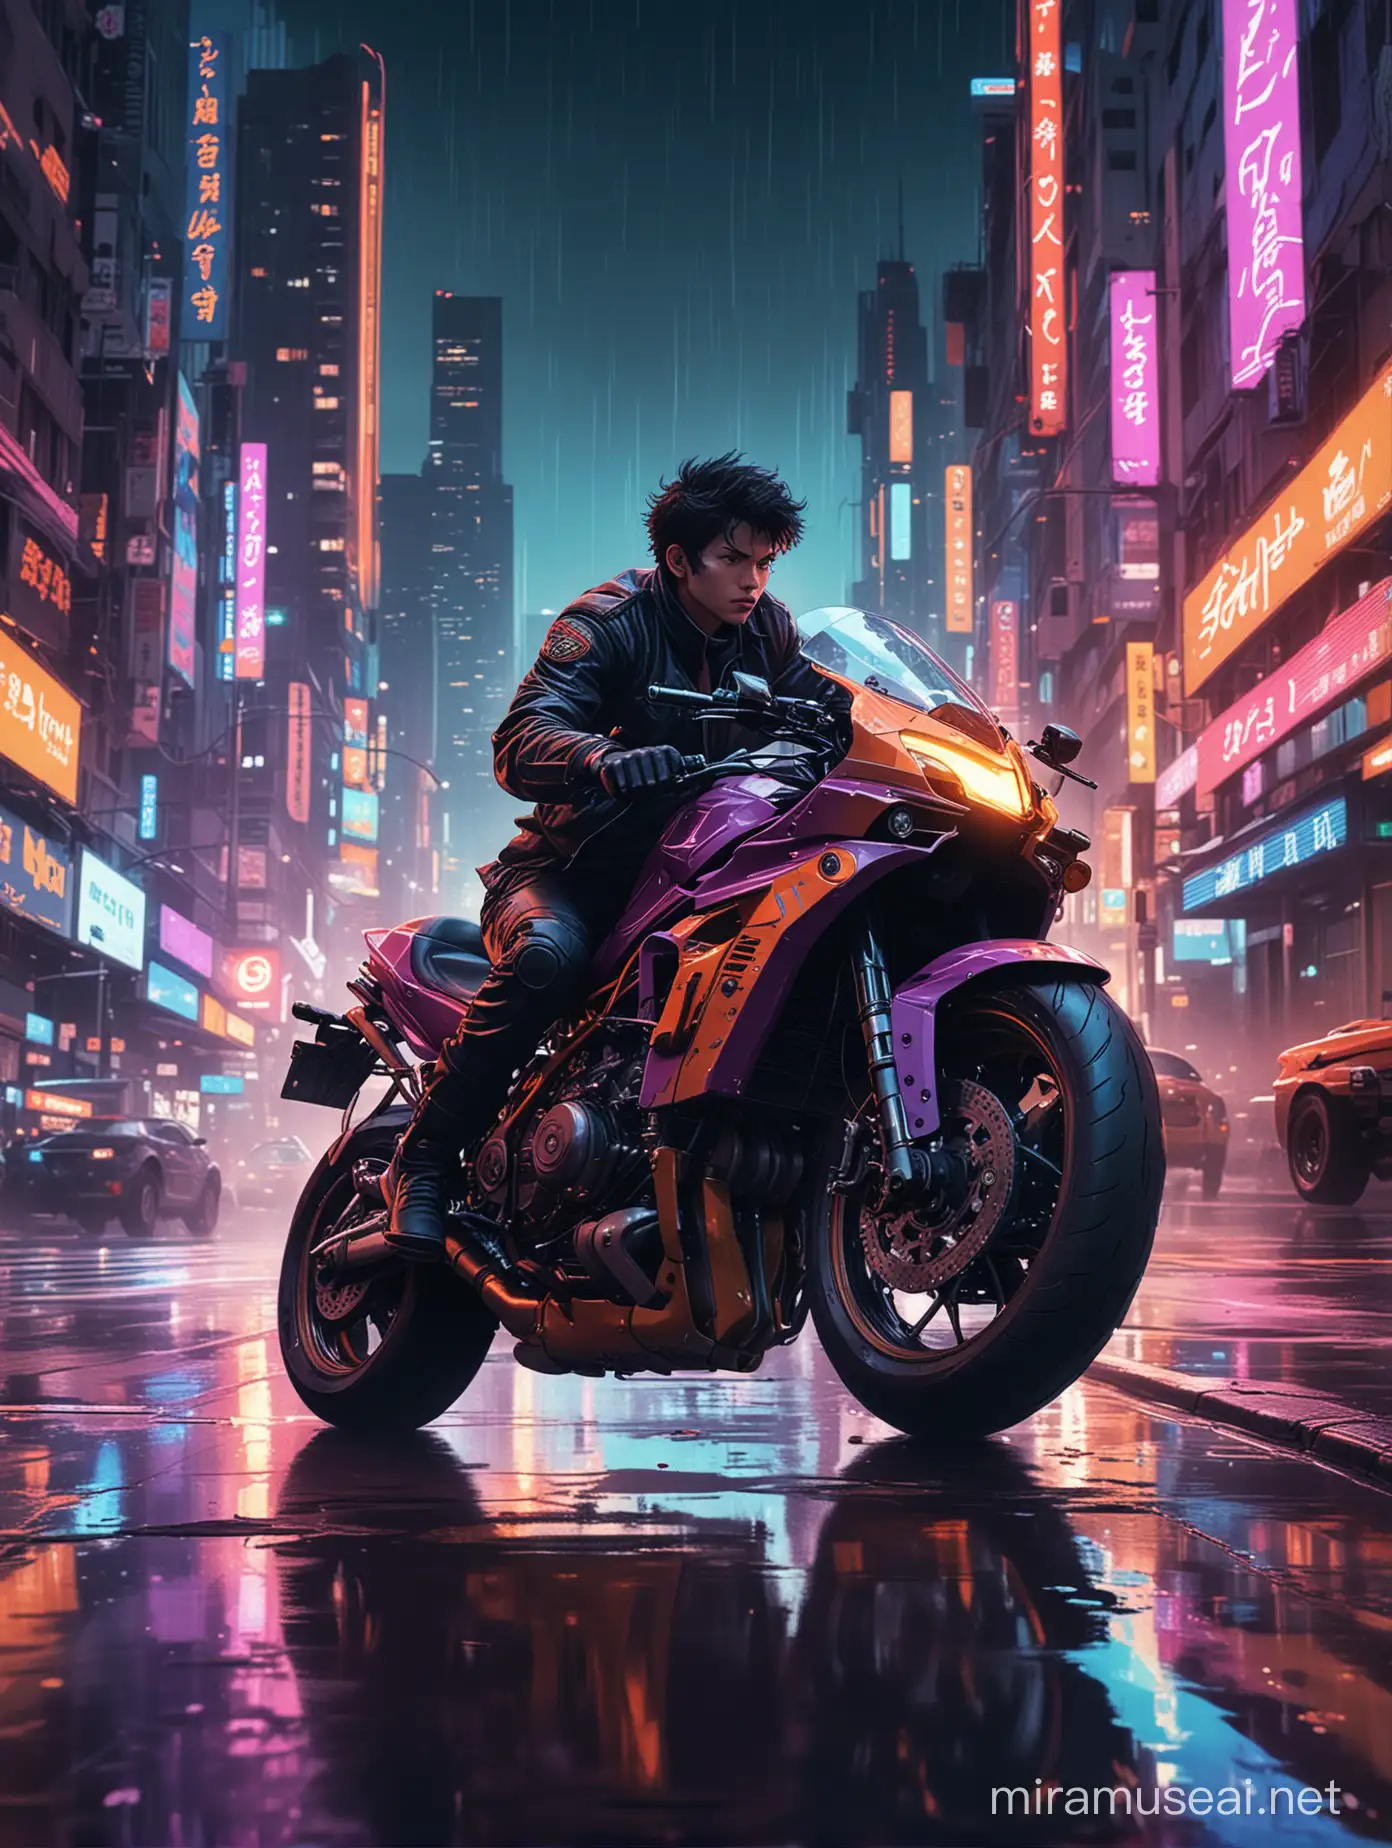 The poster features a dynamic scene reminiscent of 1980s anime, particularly inspired by Akira.
In the foreground, a man is depicted riding a futuristic motorcycle, leaning forward as he speeds through the city streets.
The cityscape behind him is dystopian, with towering skyscrapers illuminated by neon lights, reflecting off the wet streets below.
The atmosphere is intense, with a sense of motion and speed conveyed through blurred lines and streaks of light trailing behind the motorcycle.
The color palette is bold and vibrant, with hues of deep blues, purples, and oranges, evoking the neon-lit streets of a futuristic city at night.
The title "Speeding Through the Night: A Dystopian Journey" is prominently displayed in stylized, retro-futuristic lettering, adding to the overall aesthetic of the poster.